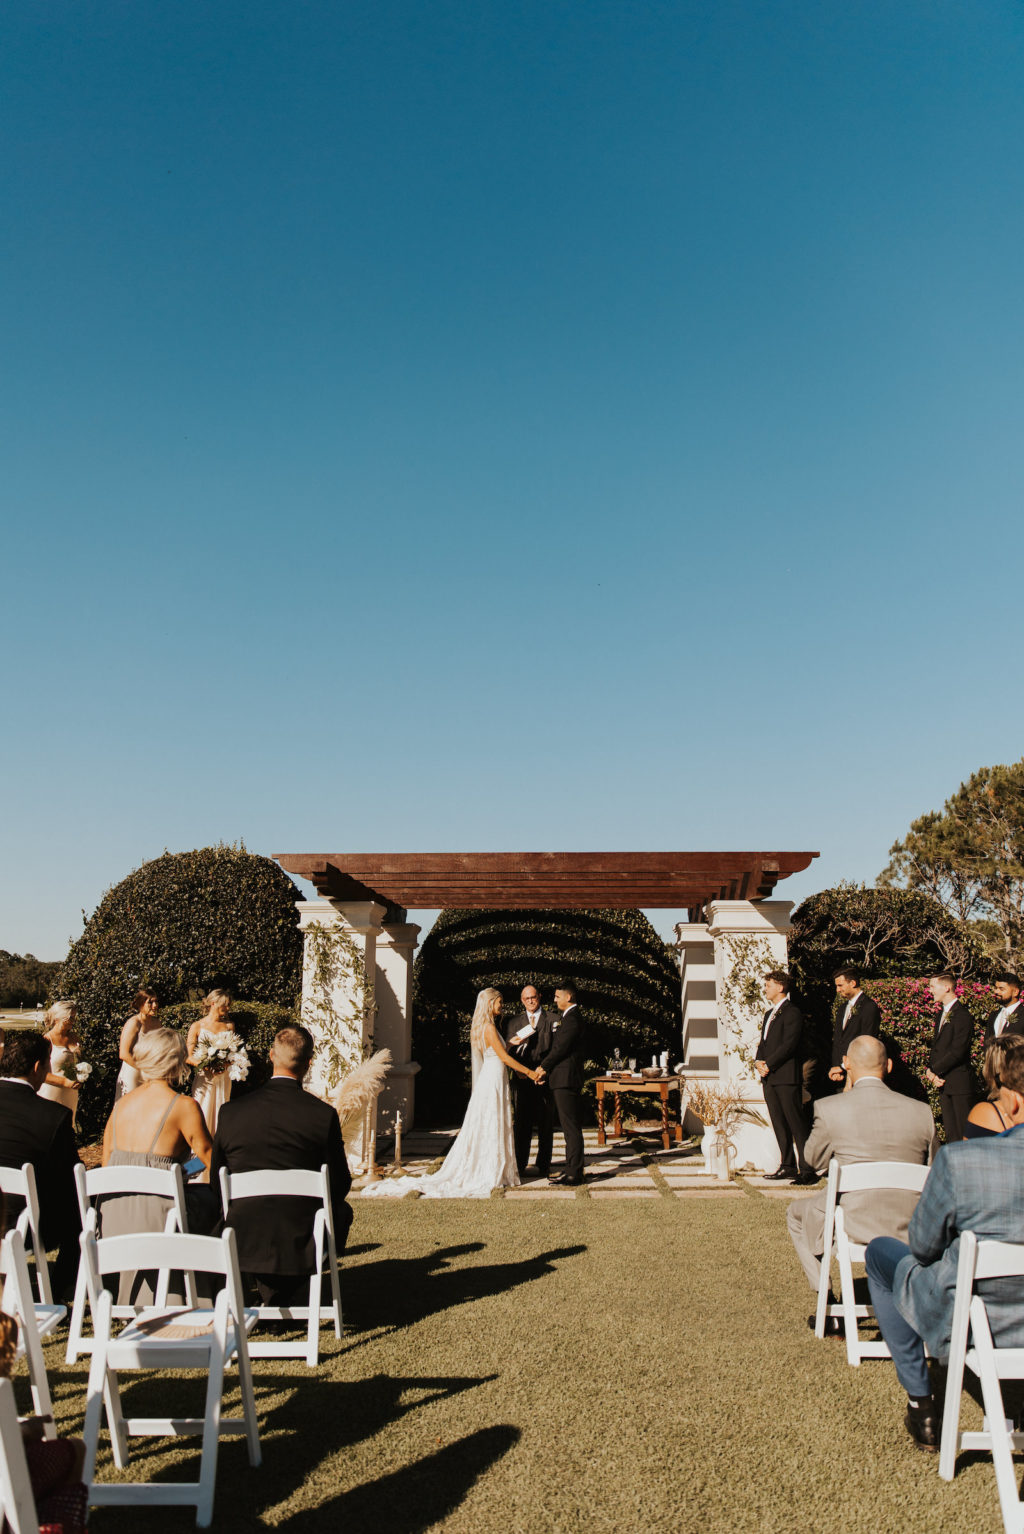 Timeless Bride and Groom Exchanging Wedding Vows Under Outdoor Pergola | Tampa Wedding Venue The Concession Golf Course